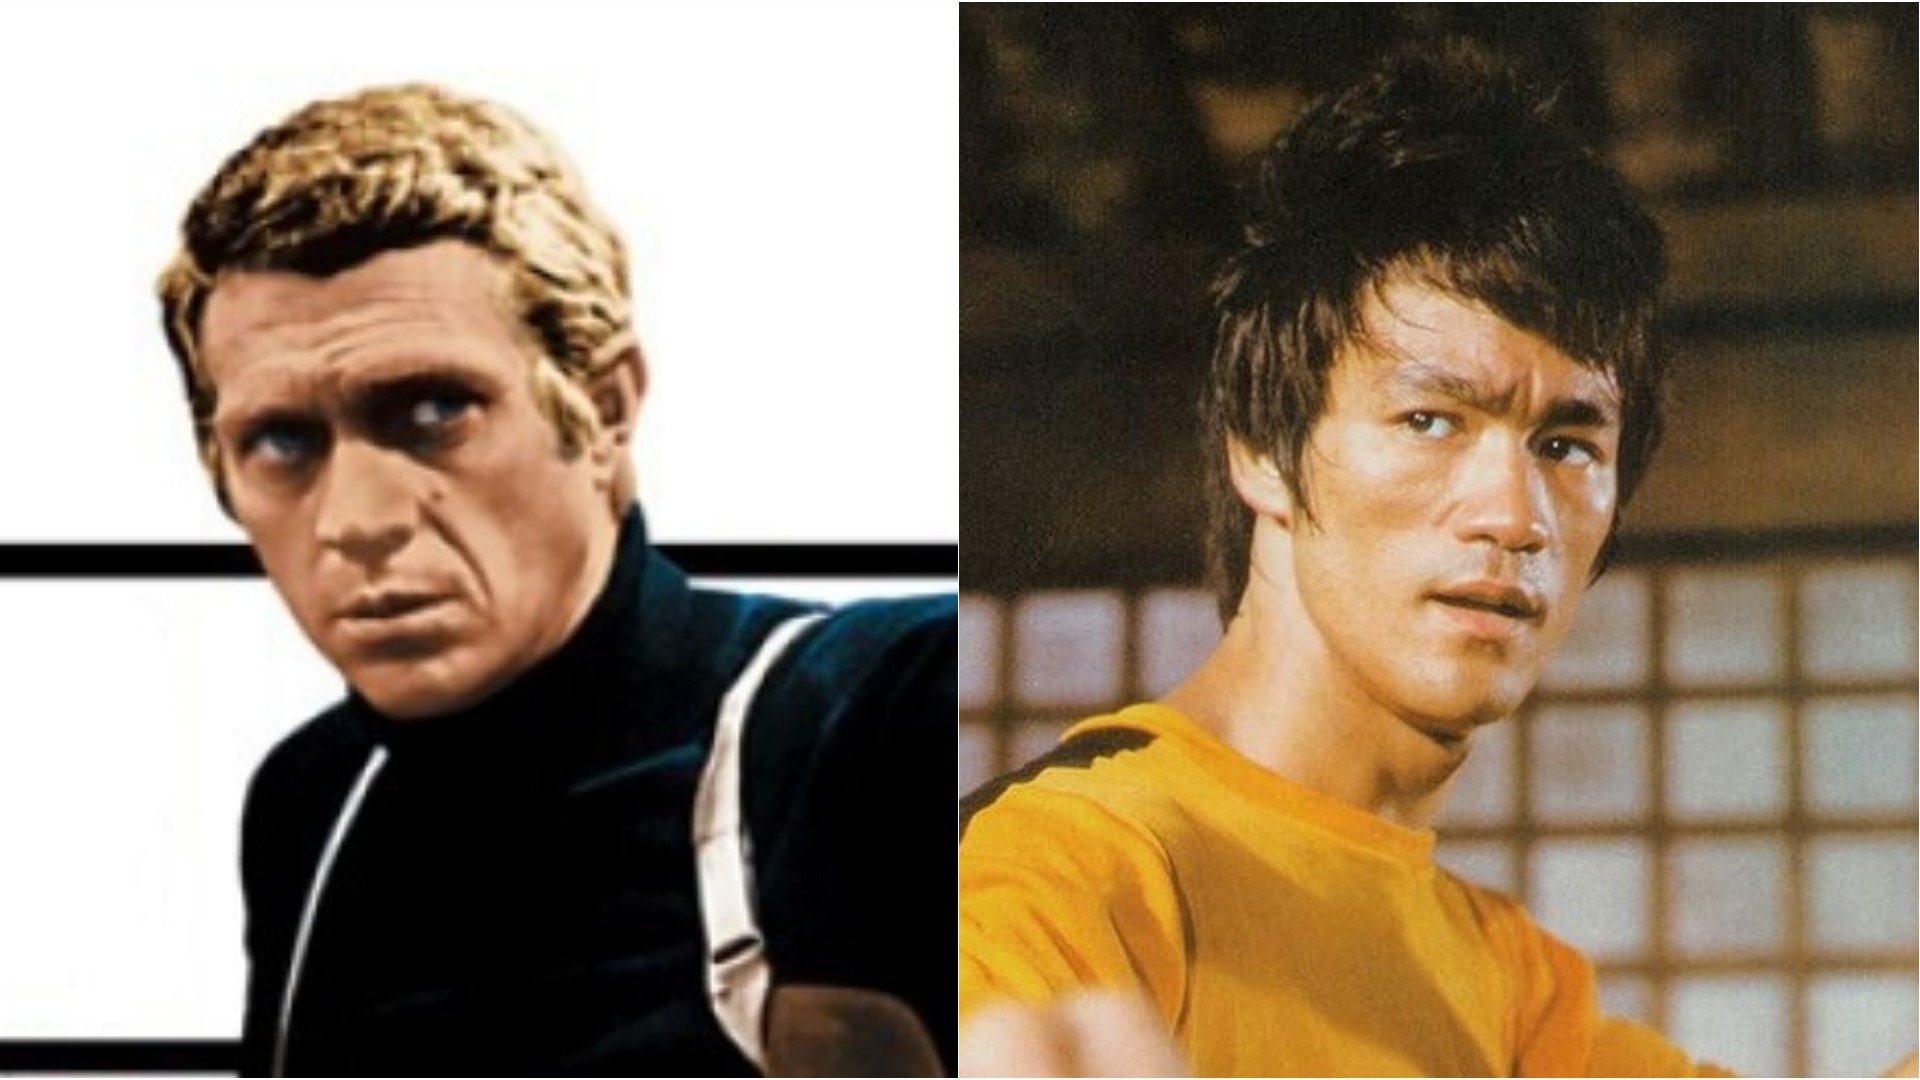 Steve McQueen and Bruce Lee: Inside Their Hollywood Rivalry